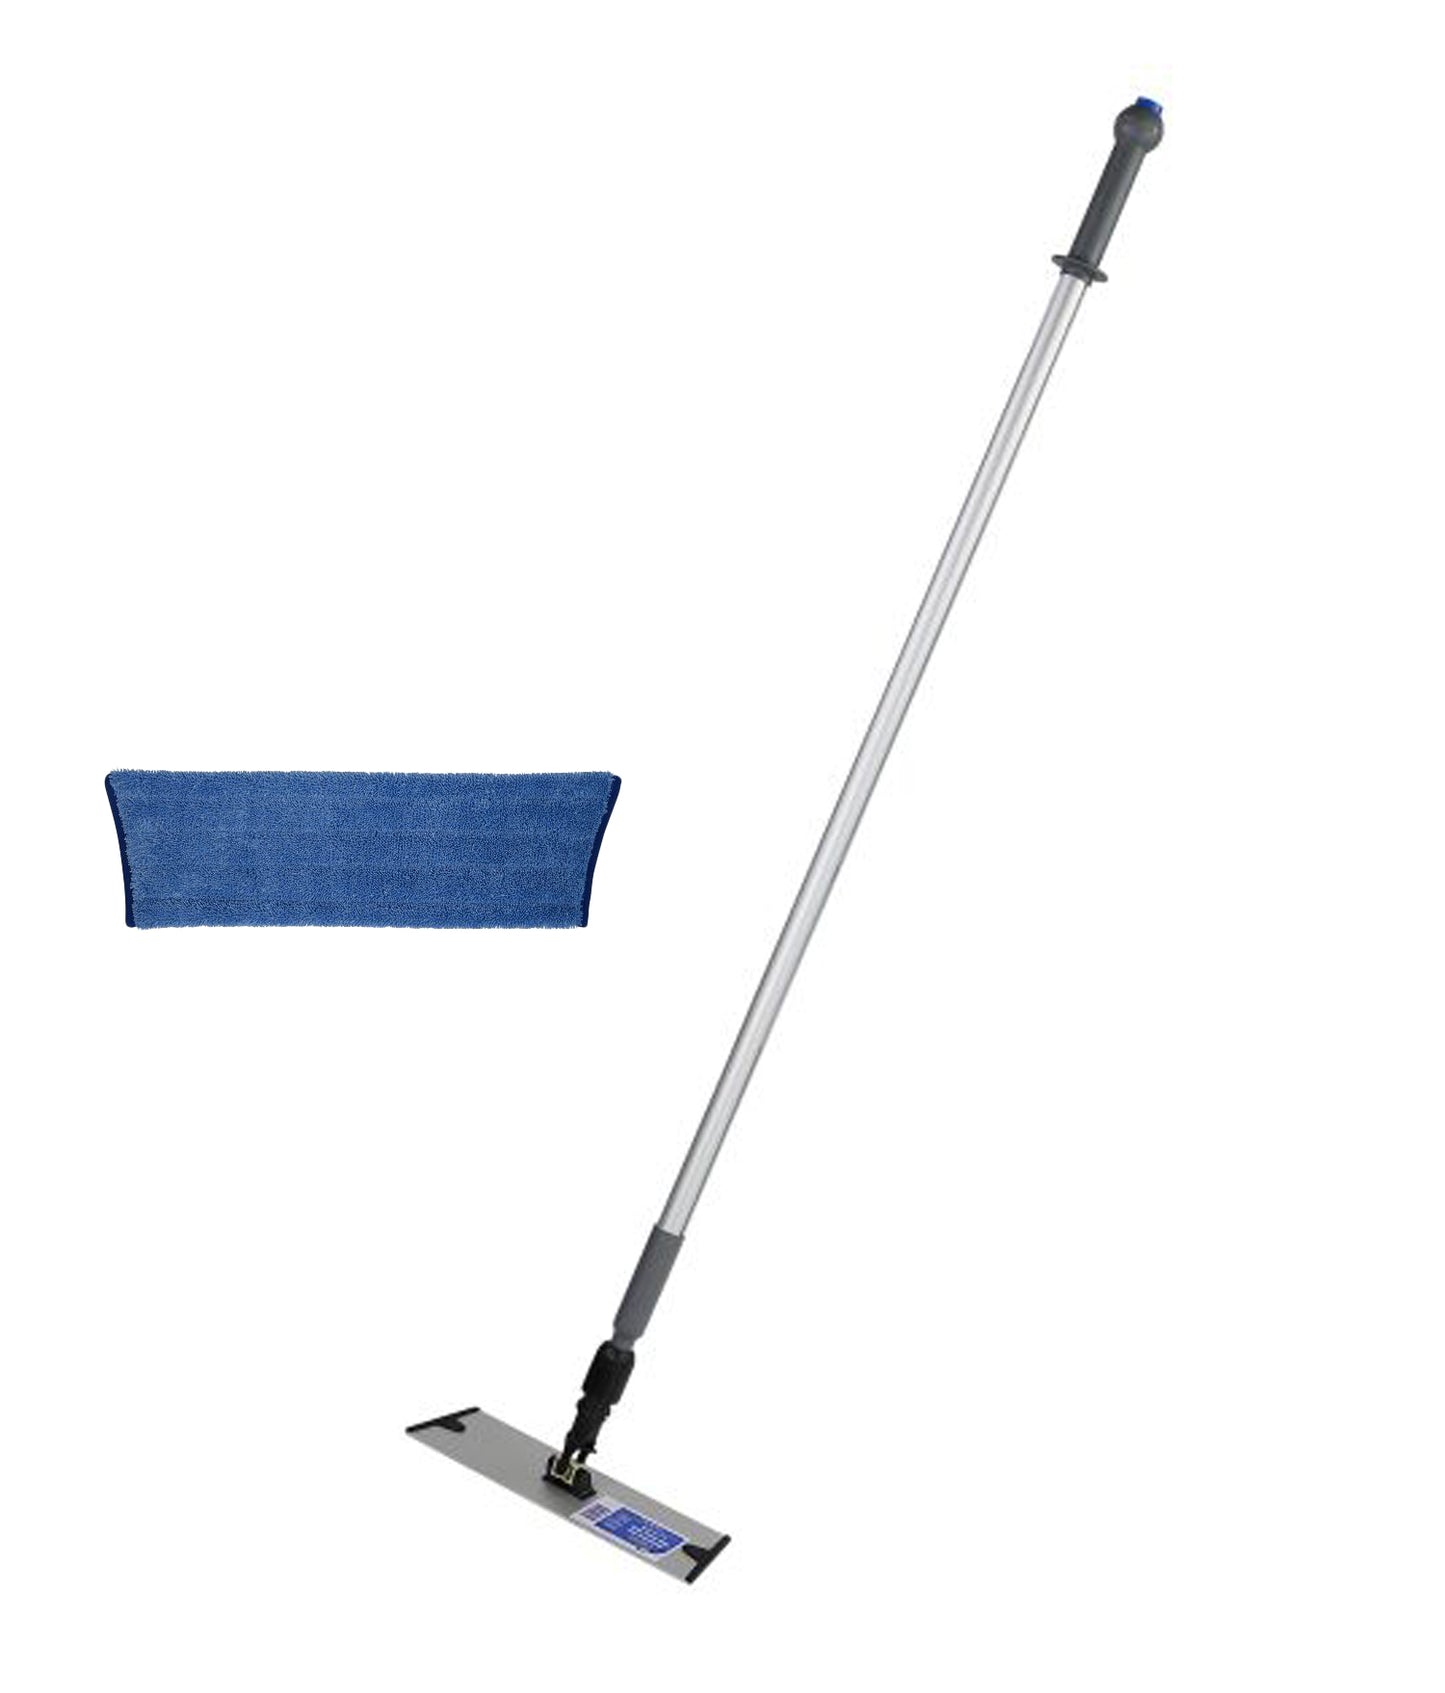 Edco Enduro Spray Mop - Complete 1 Unit - Stone Doctor Australia - Cleaning Accessories > Tools > Mops